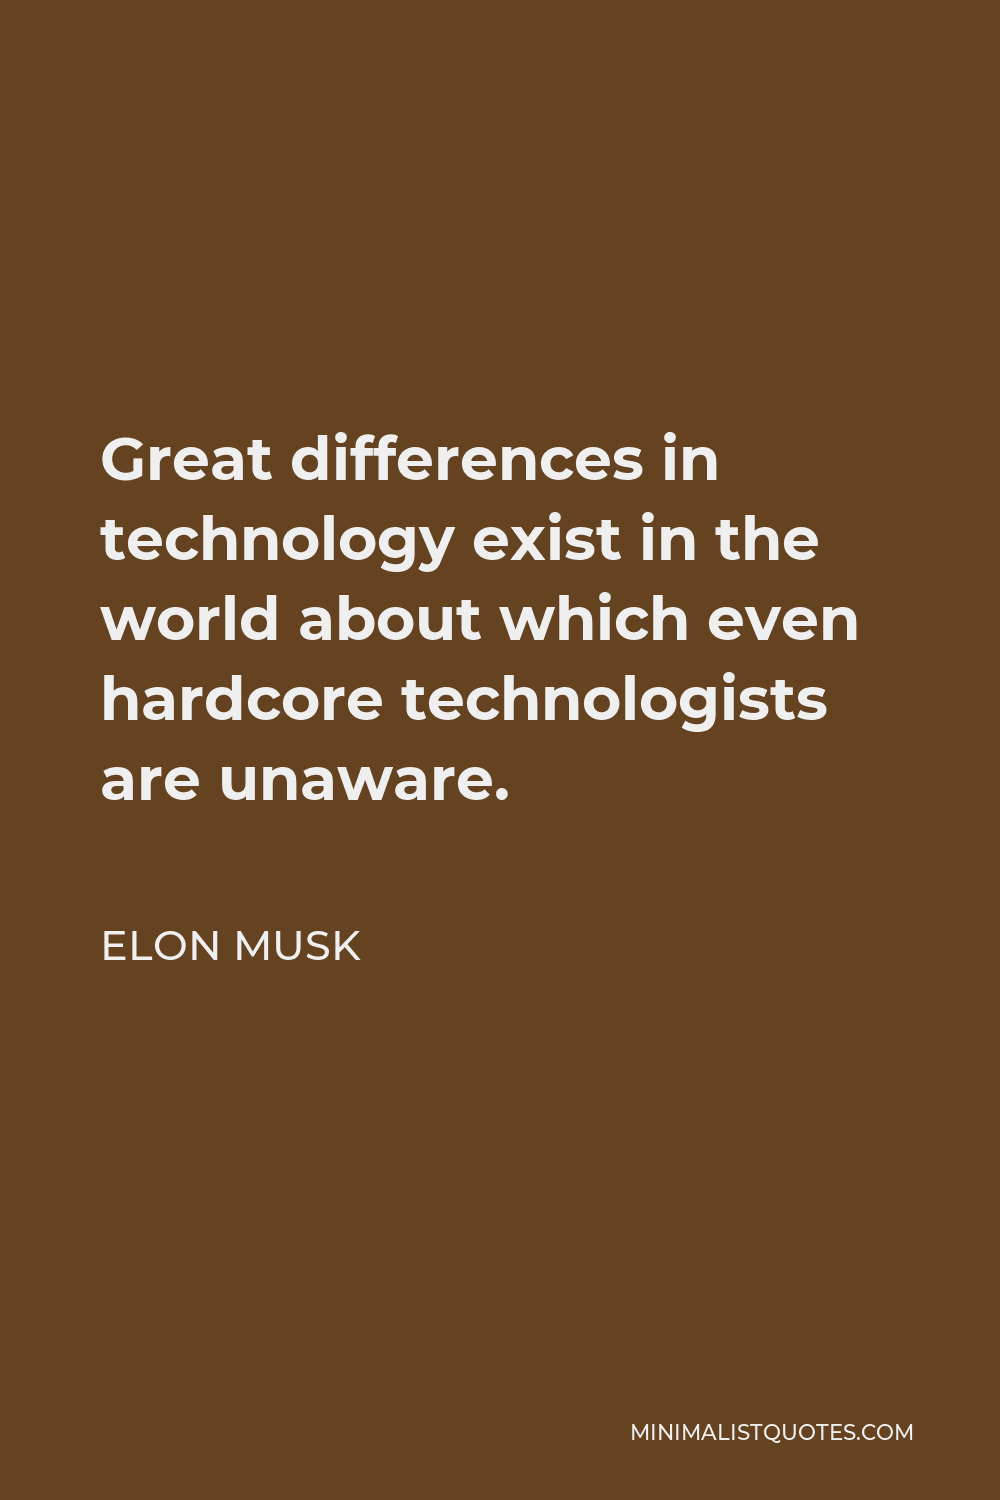 Elon Musk Quote - Great differences in technology exist in the world about which even hardcore technologists are unaware.